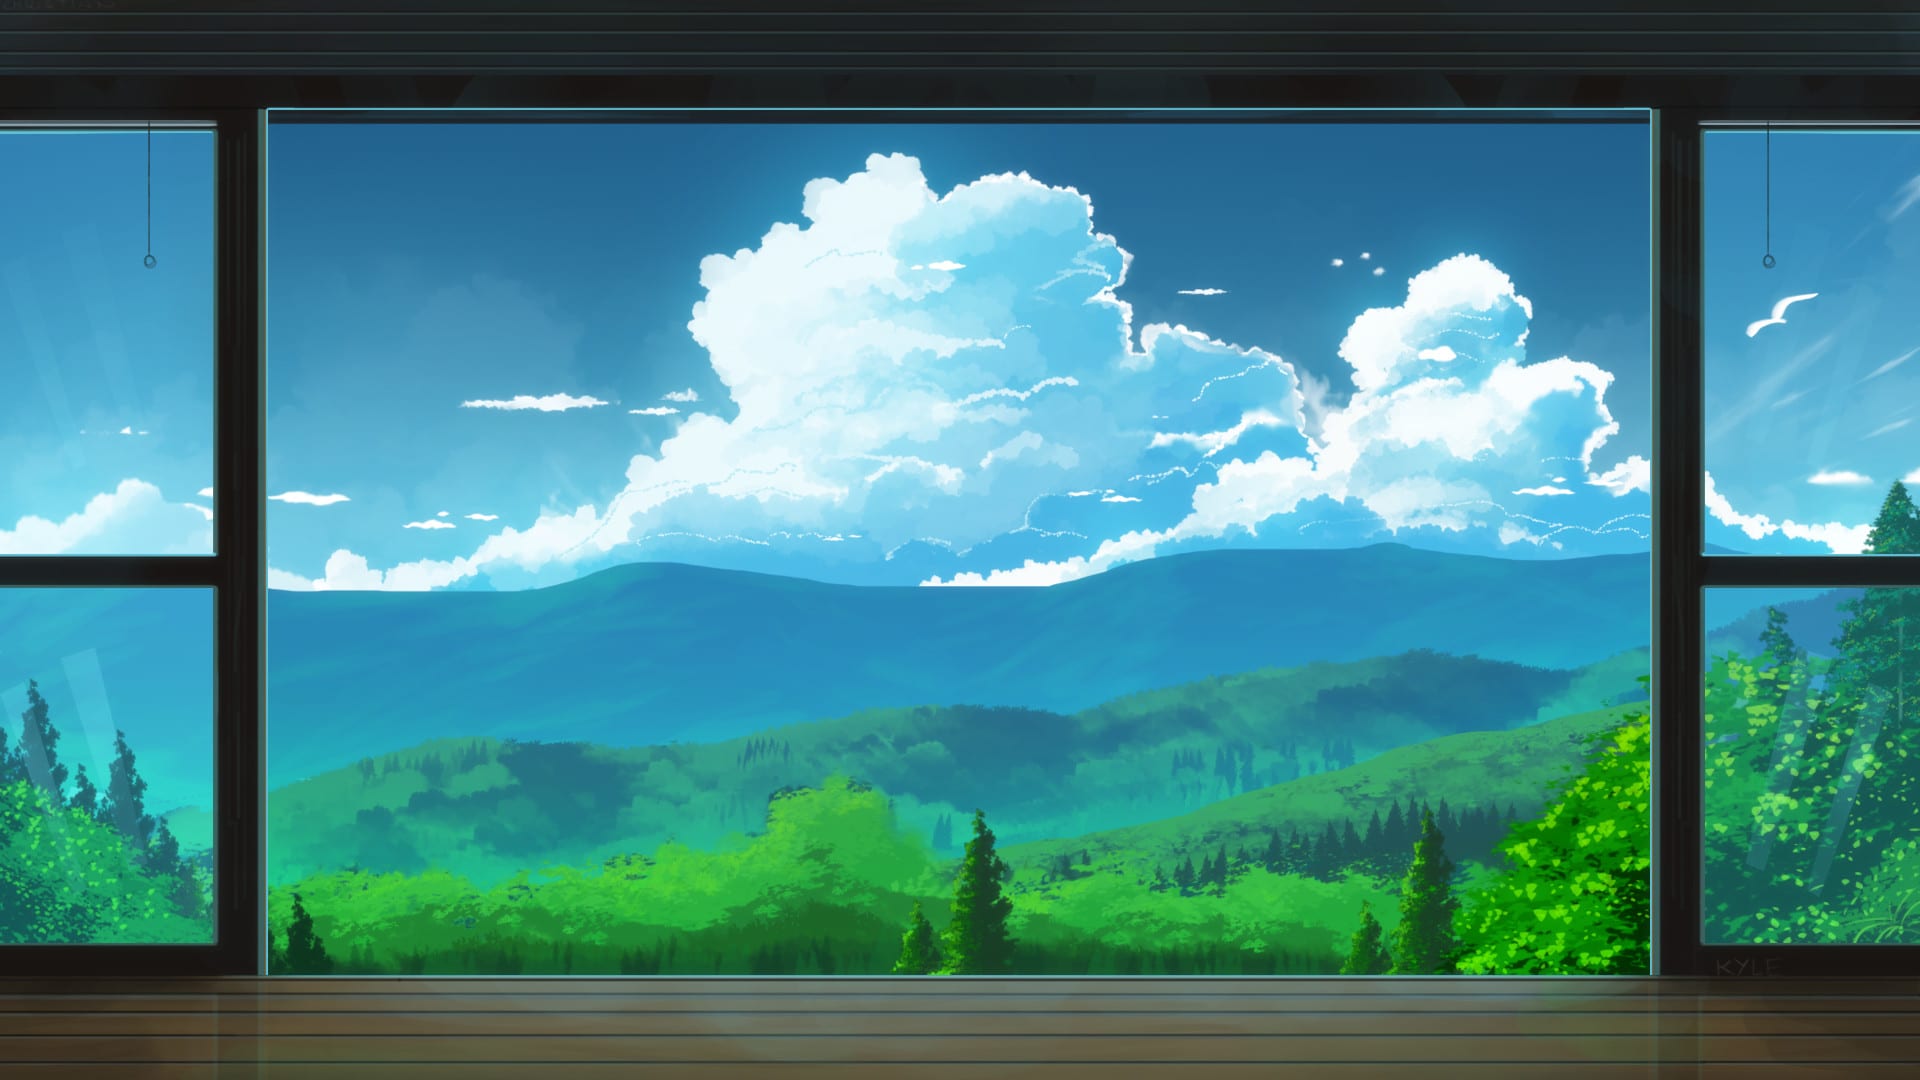 Do an amazing anime or lofi style background art for you